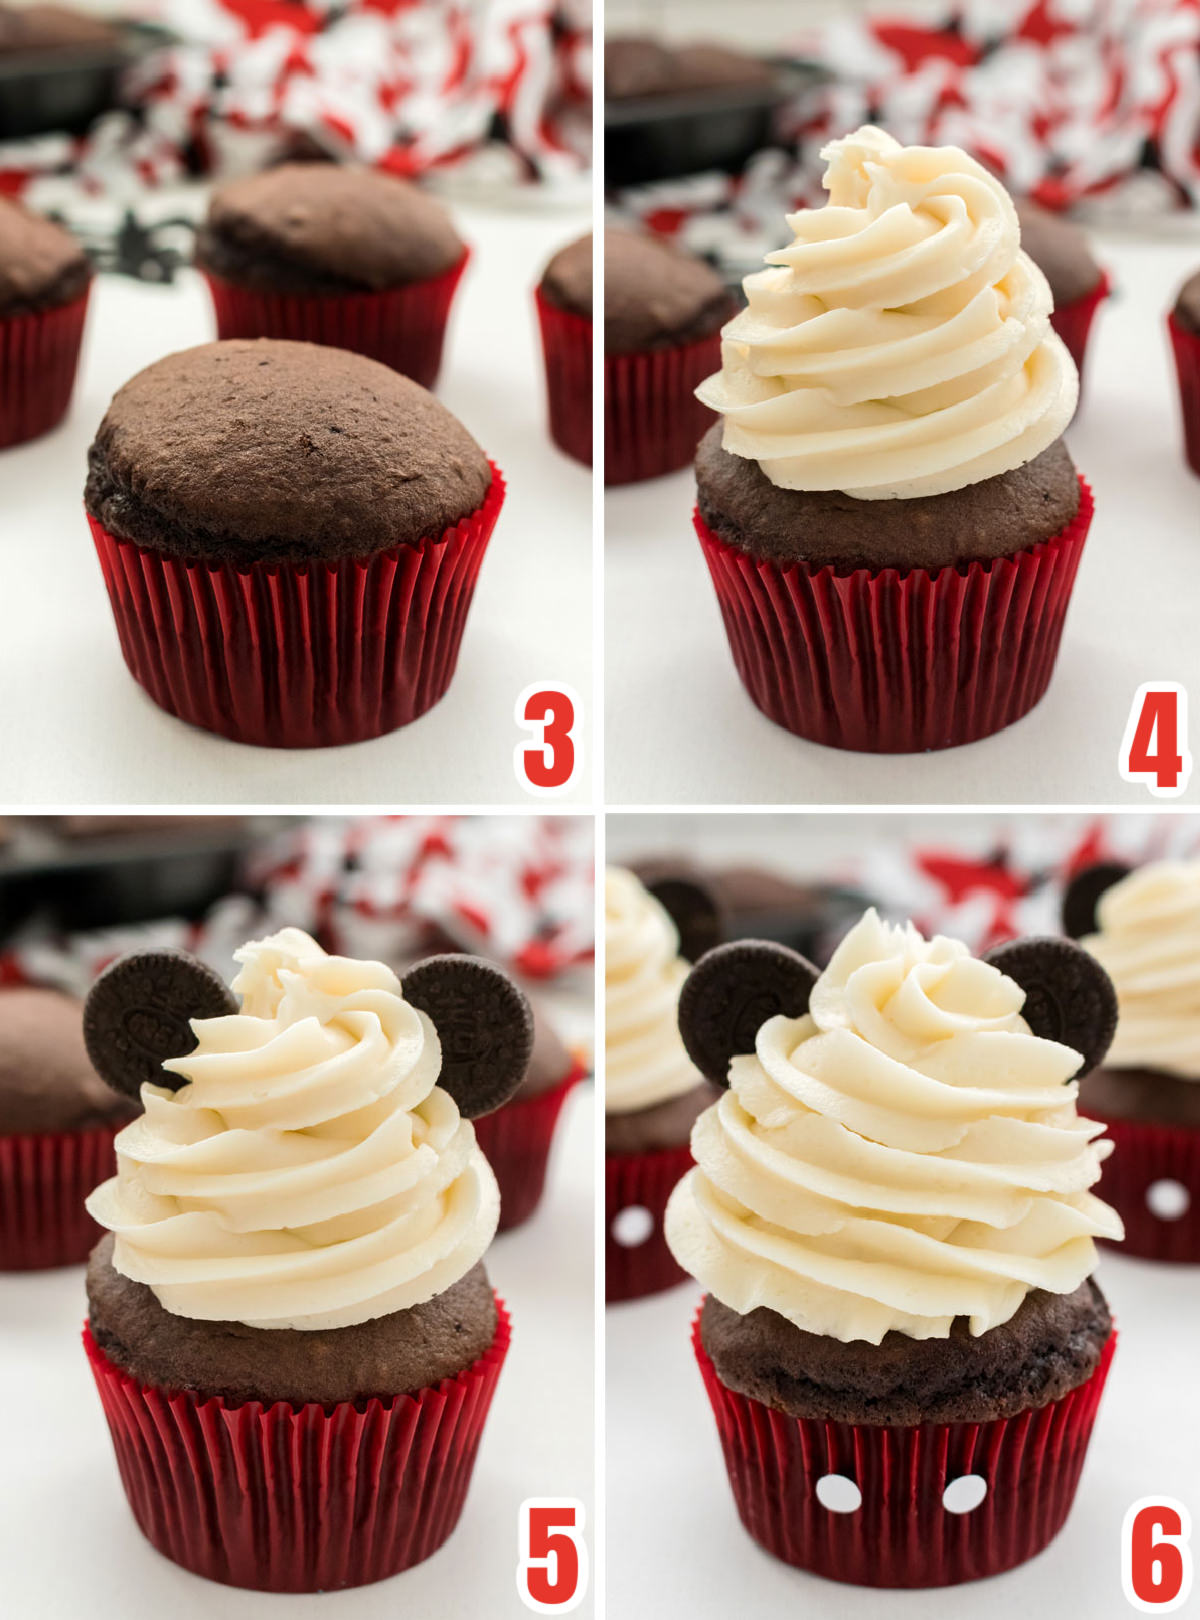 Collage image showing the steps for decorating the Mickey Mouse Cupcakes.